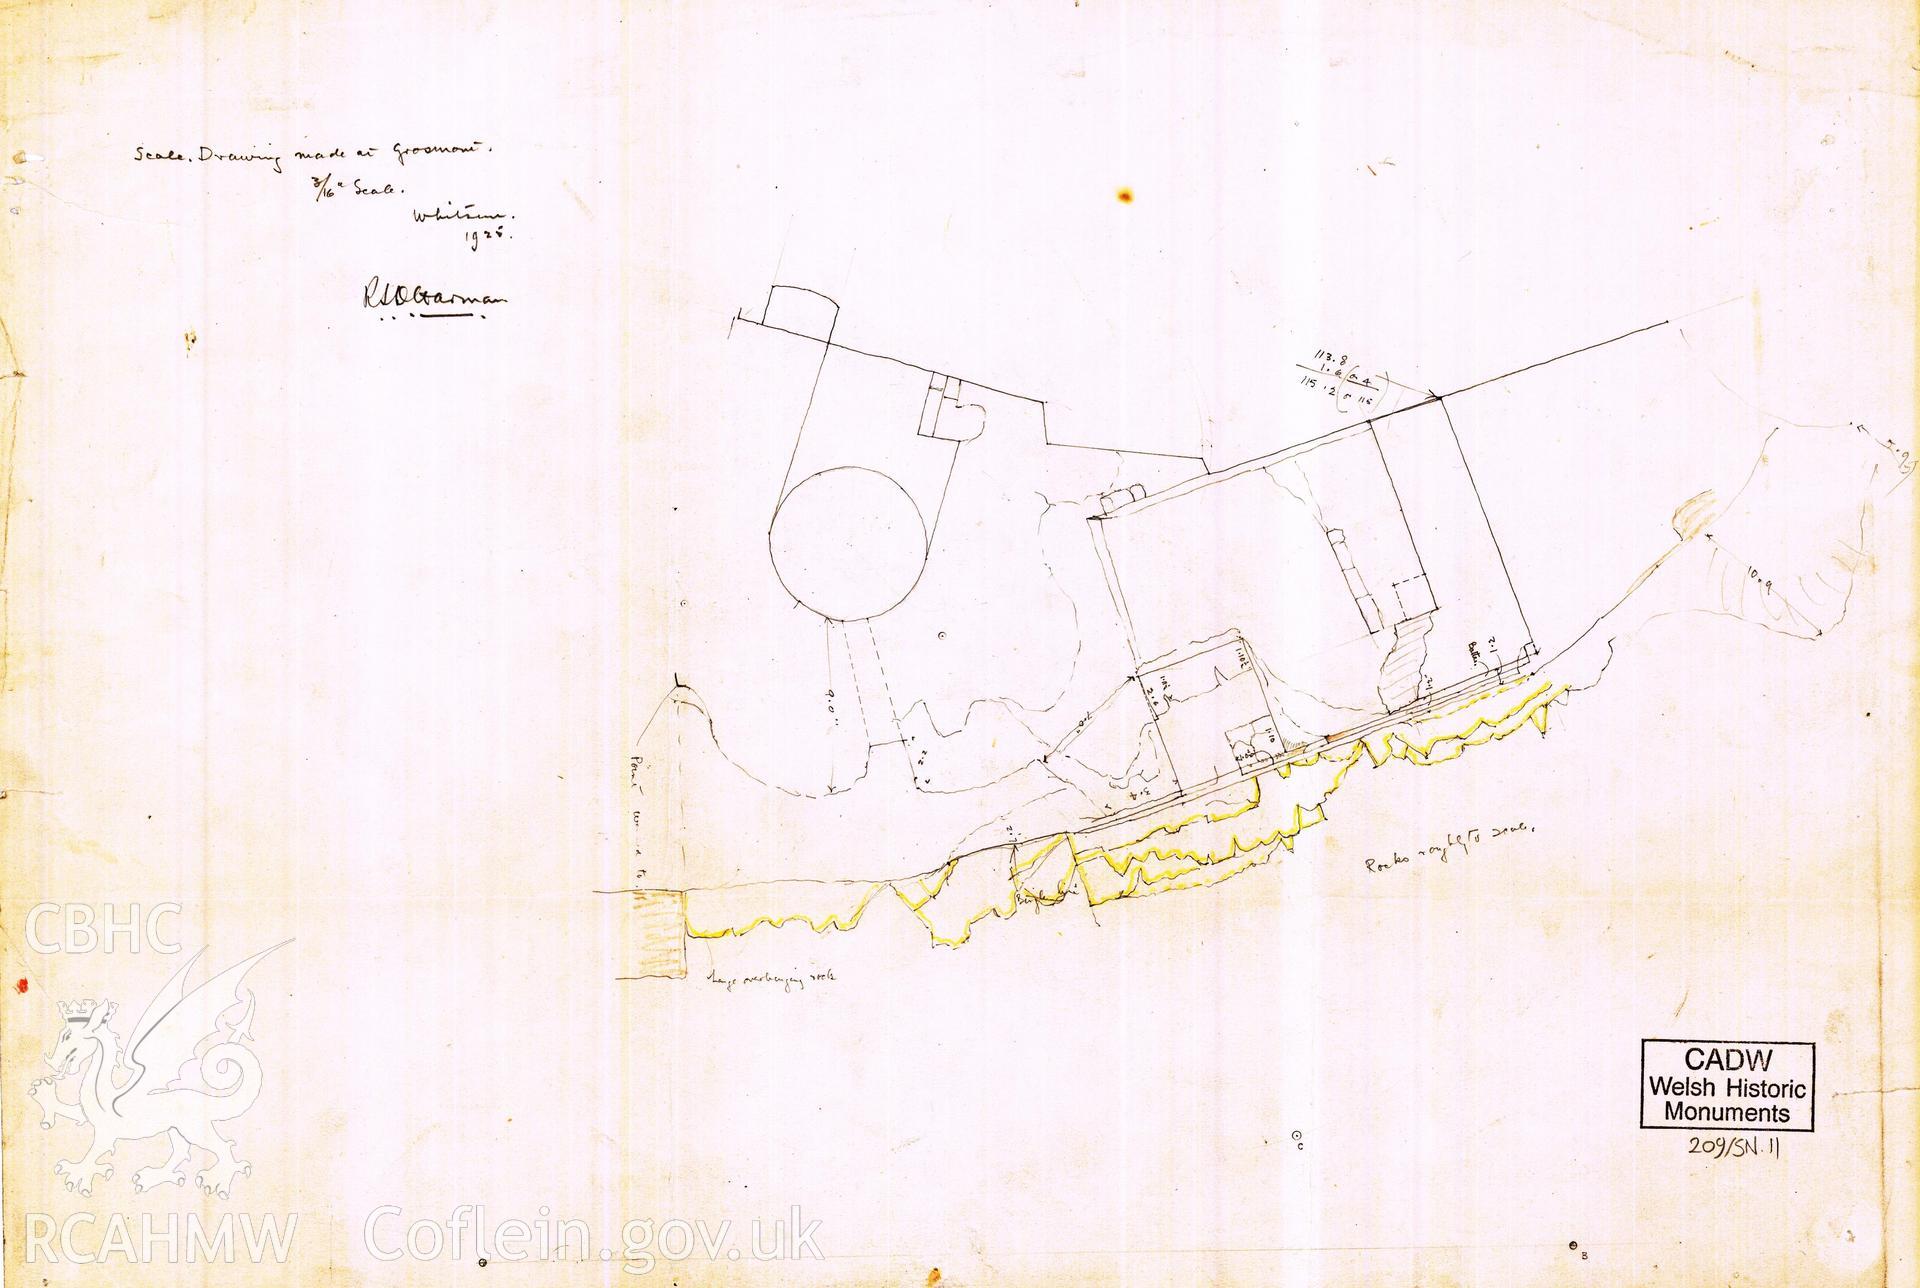 Cadw guardianship monument drawing of Grosmont Castle. NW tower, footings to W. Cadw Ref. No:209/SN.11. Scale 1:64.